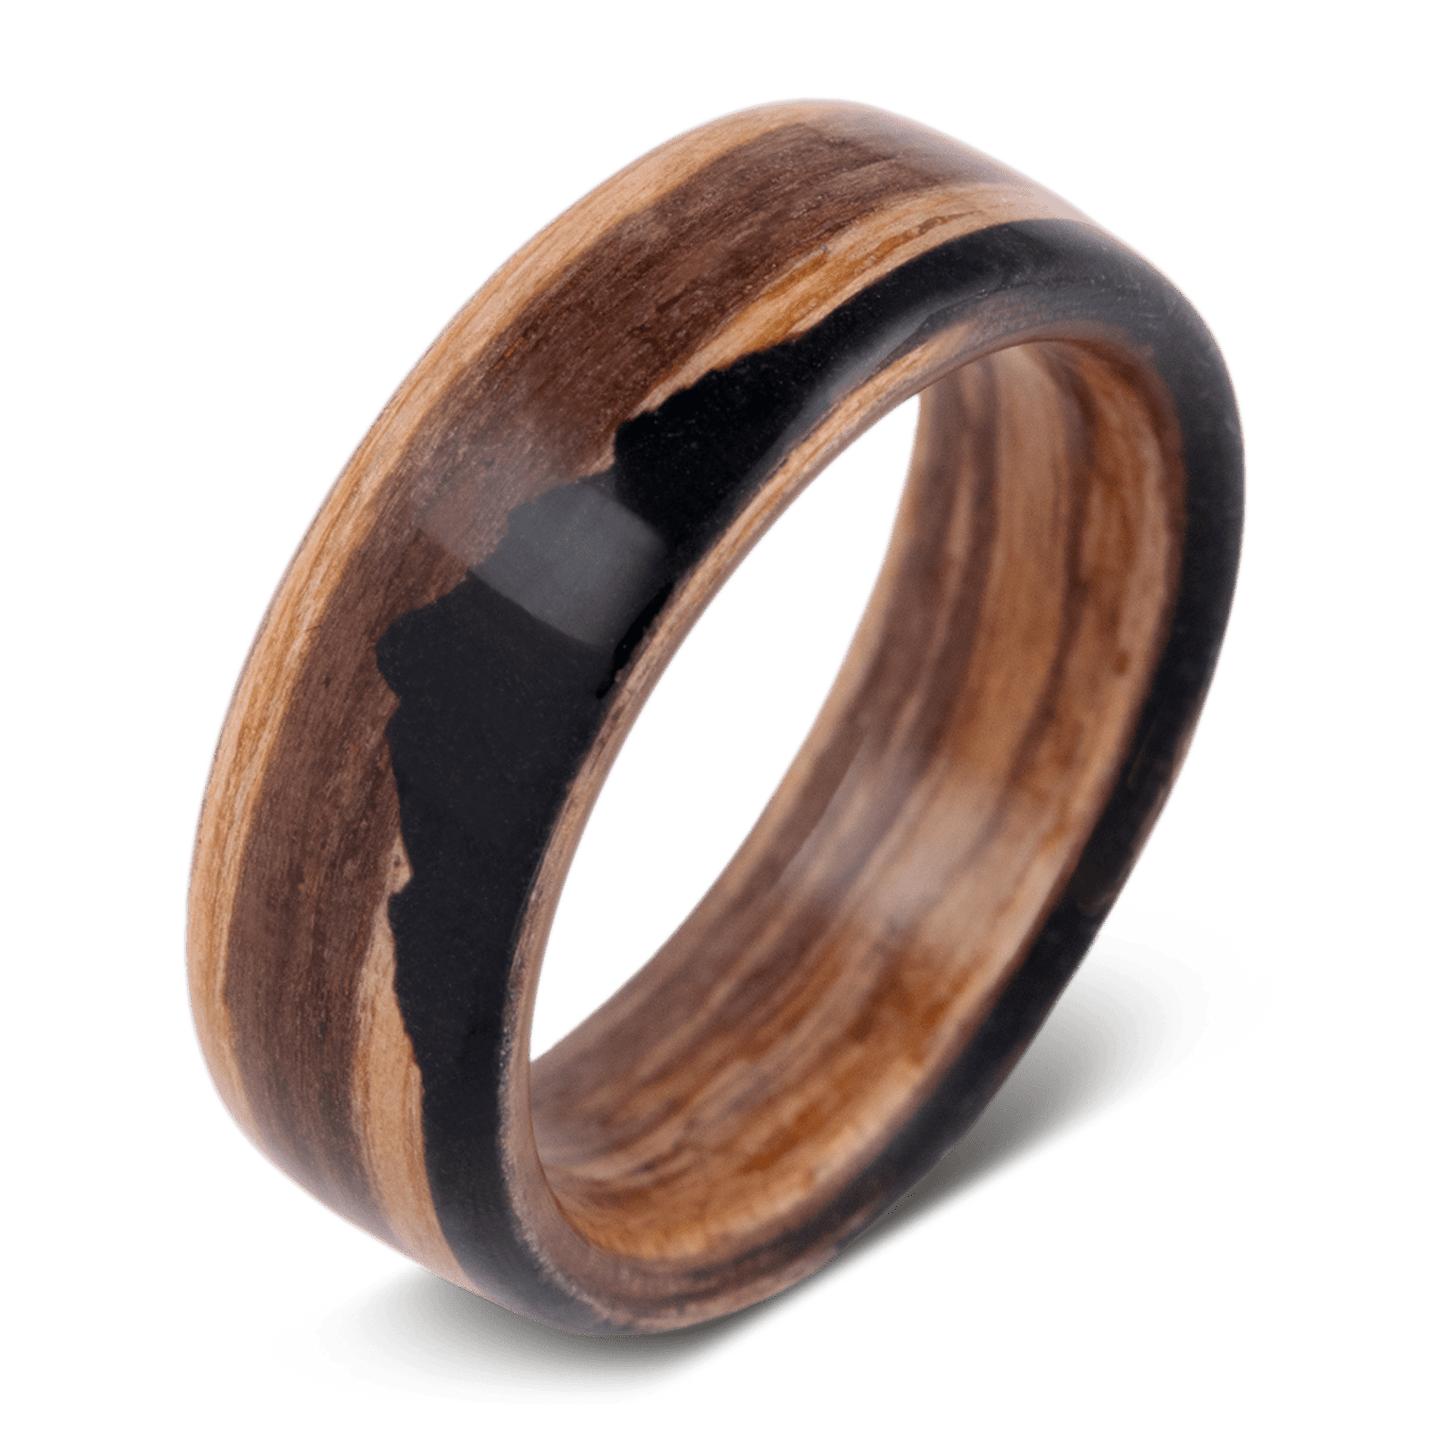 The Alpinist - Men's Wedding Rings - Manly Bands